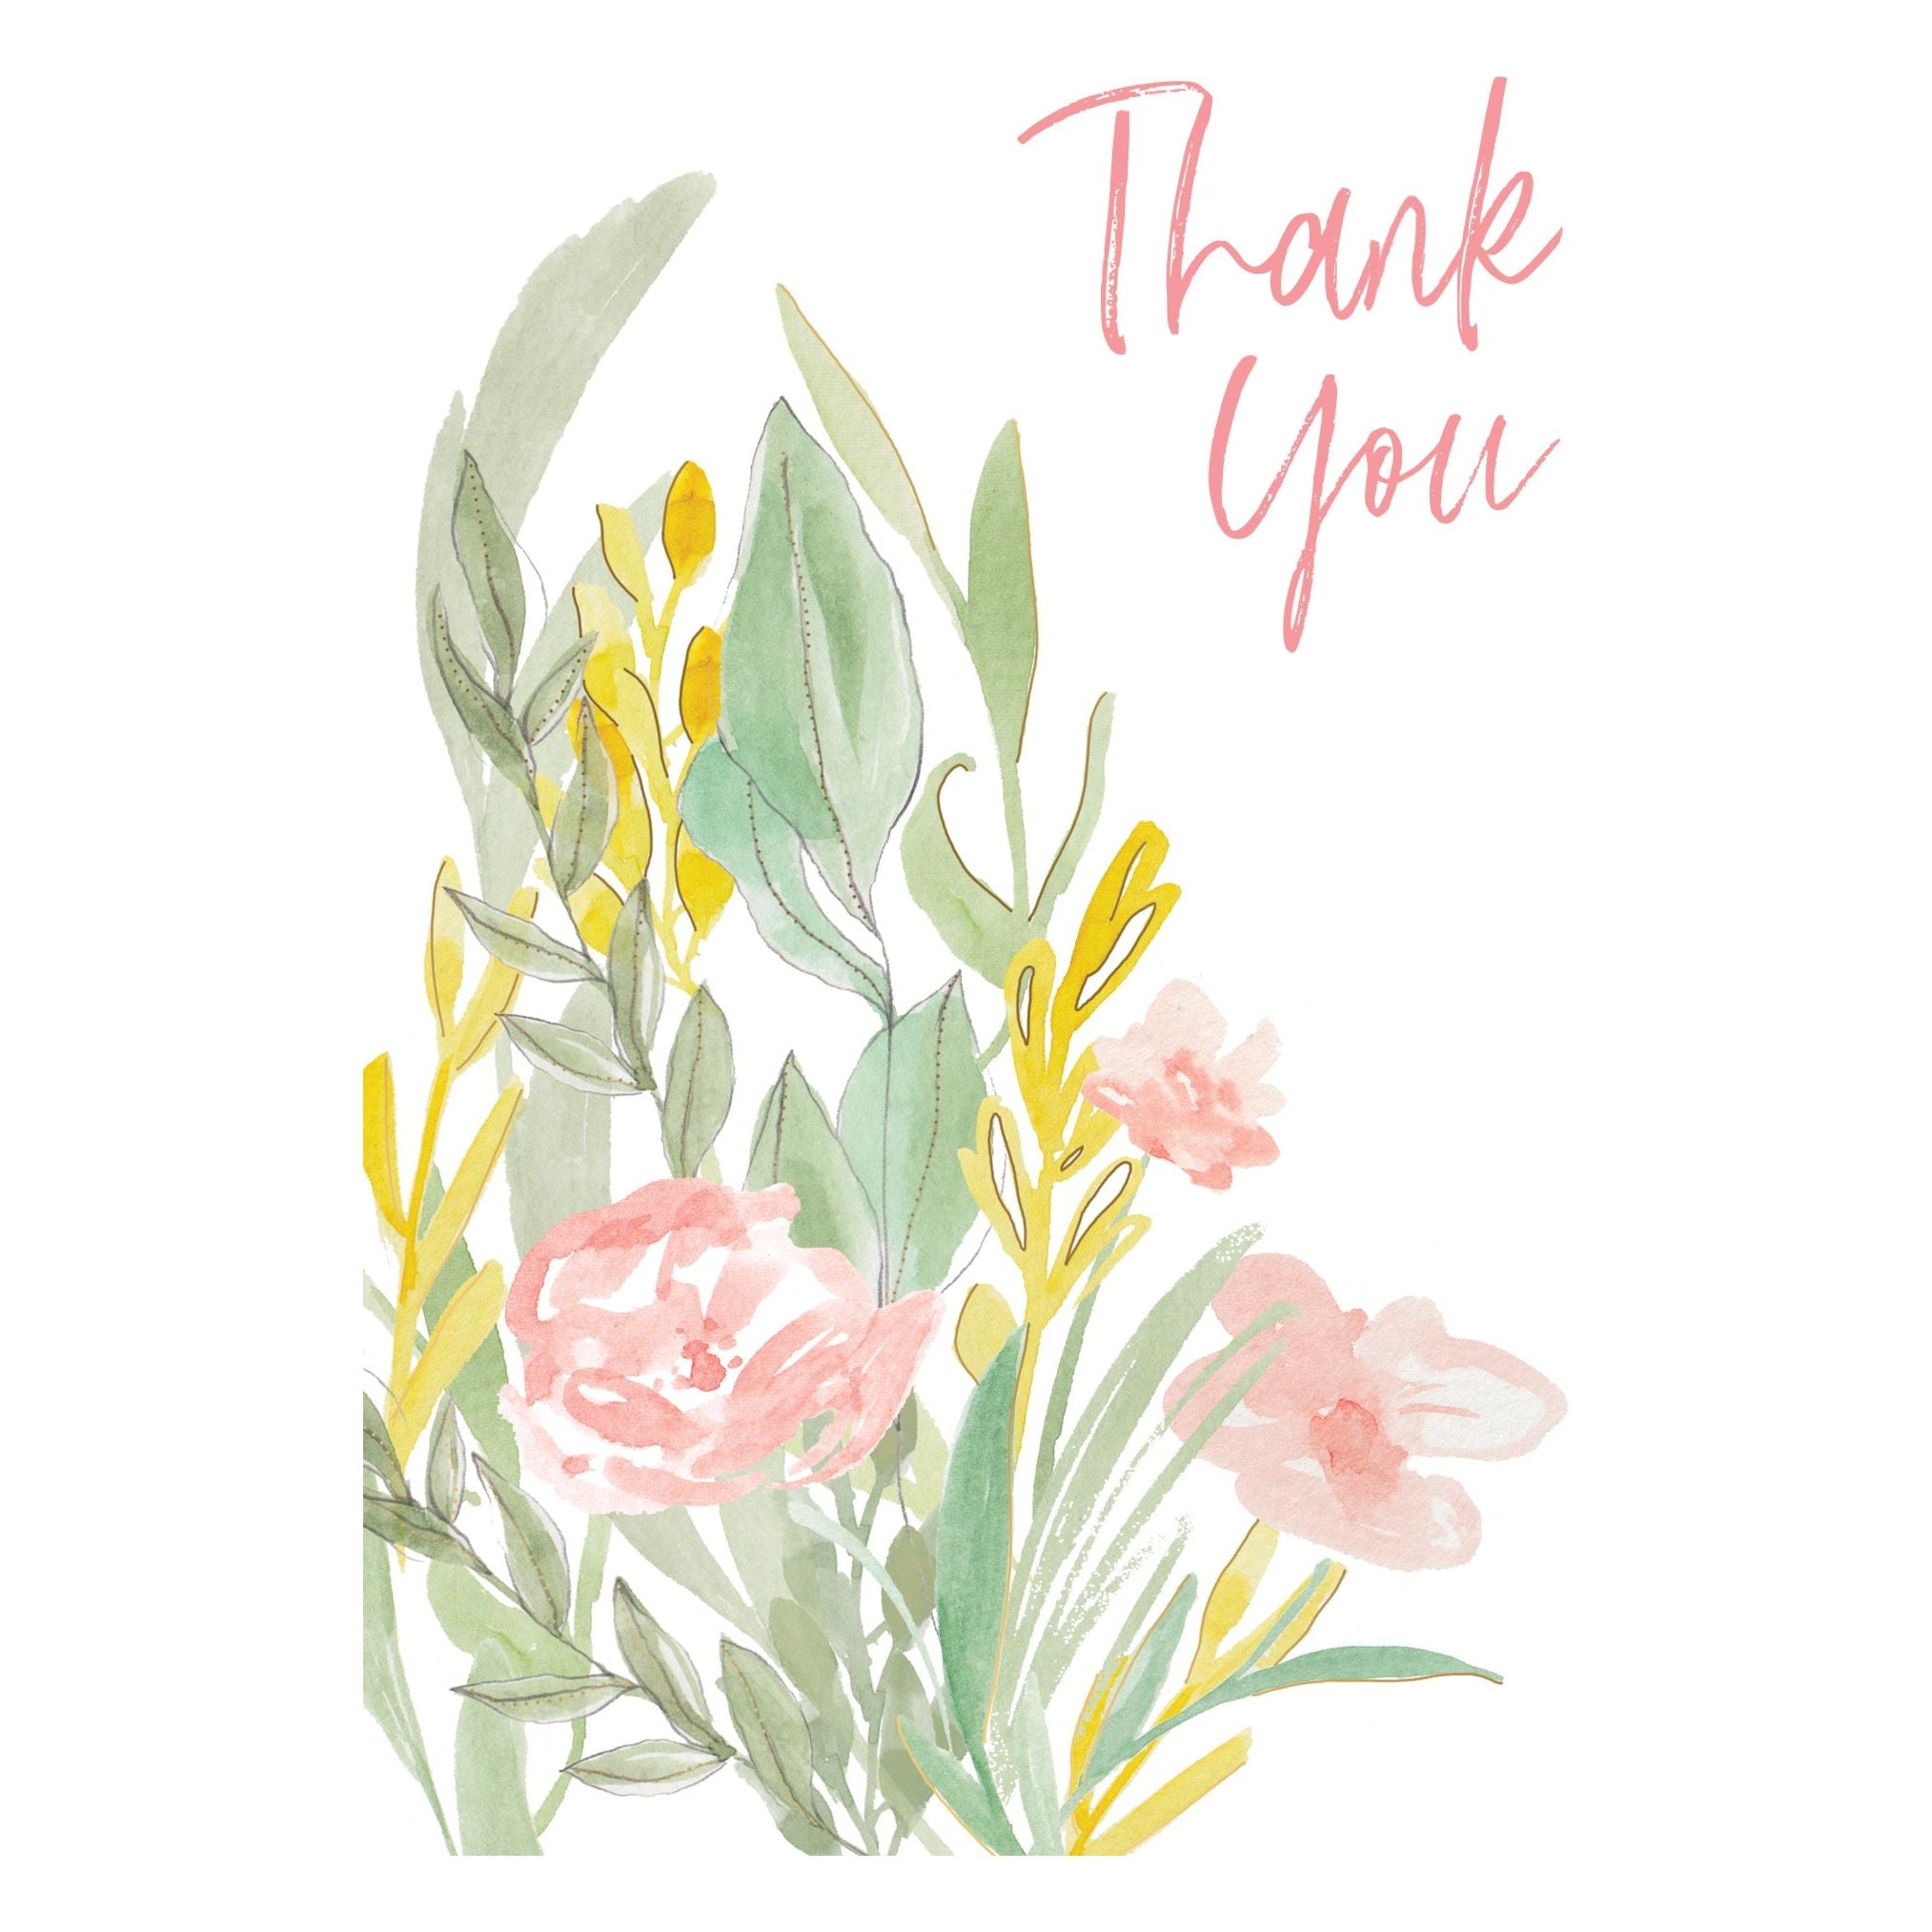 Beautiful Watercolor Thank You Cards - Browse Our Collections